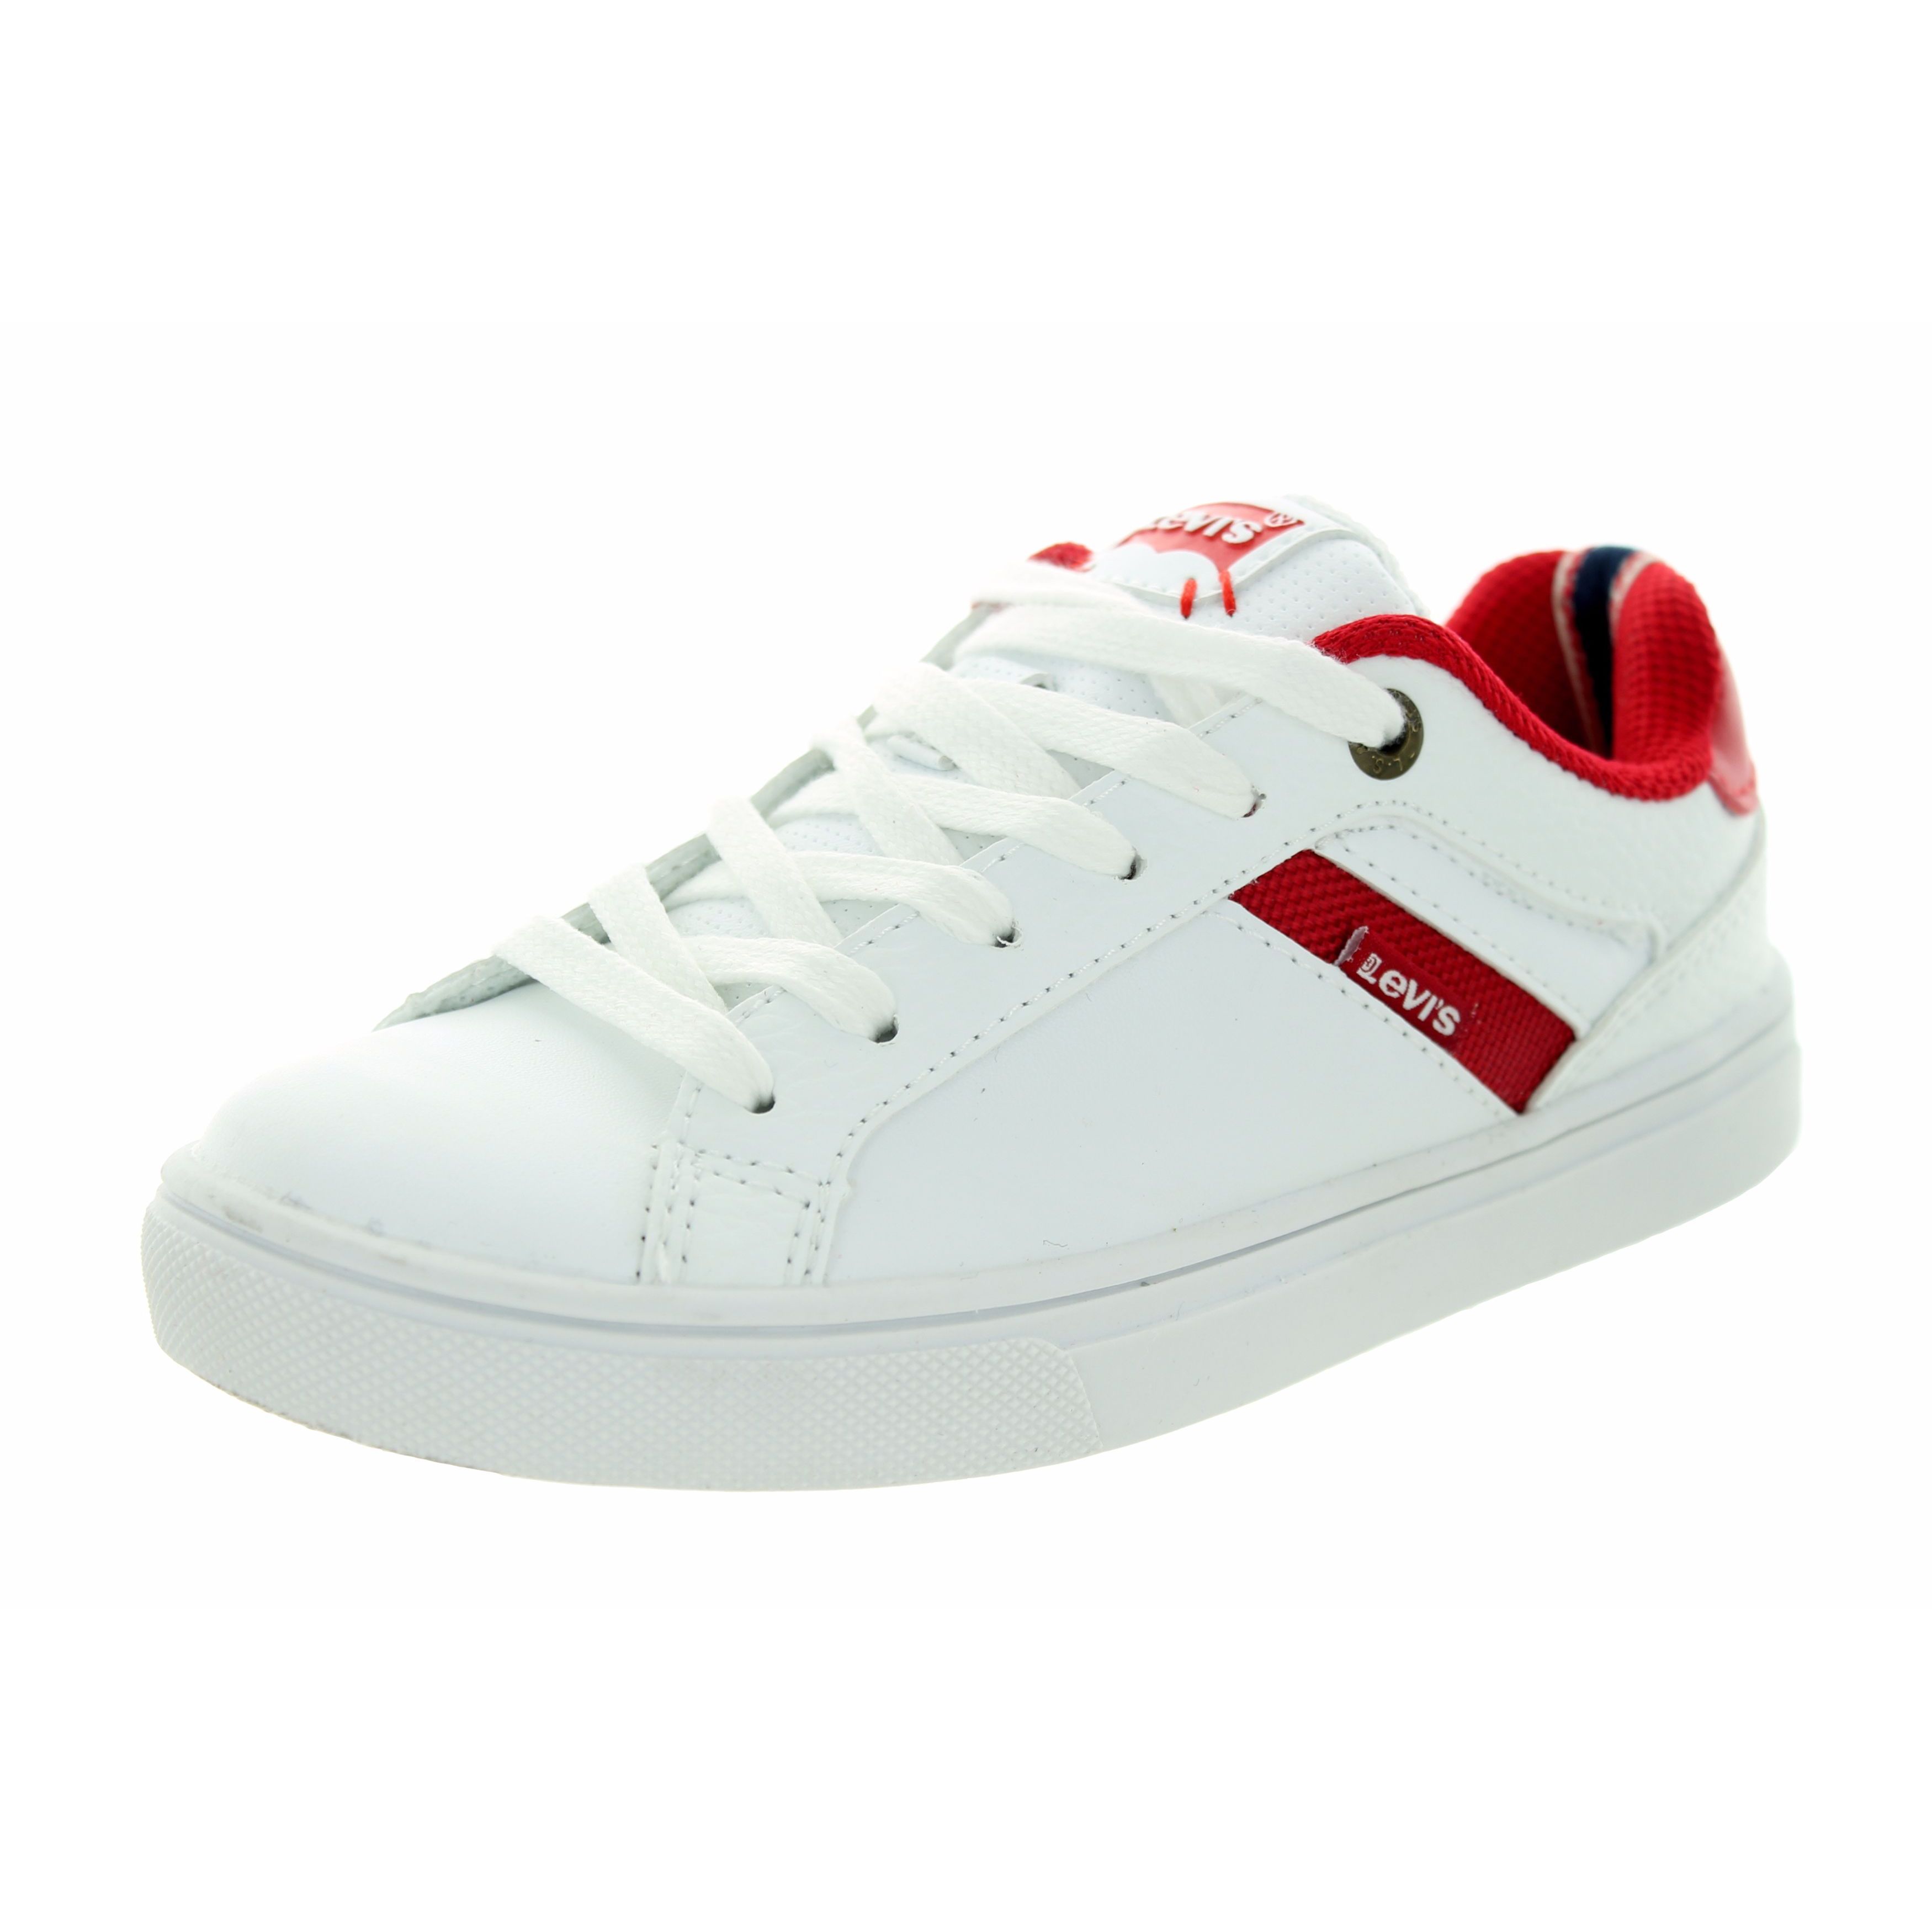 Shop Levi's Kids' Henry Core White and 